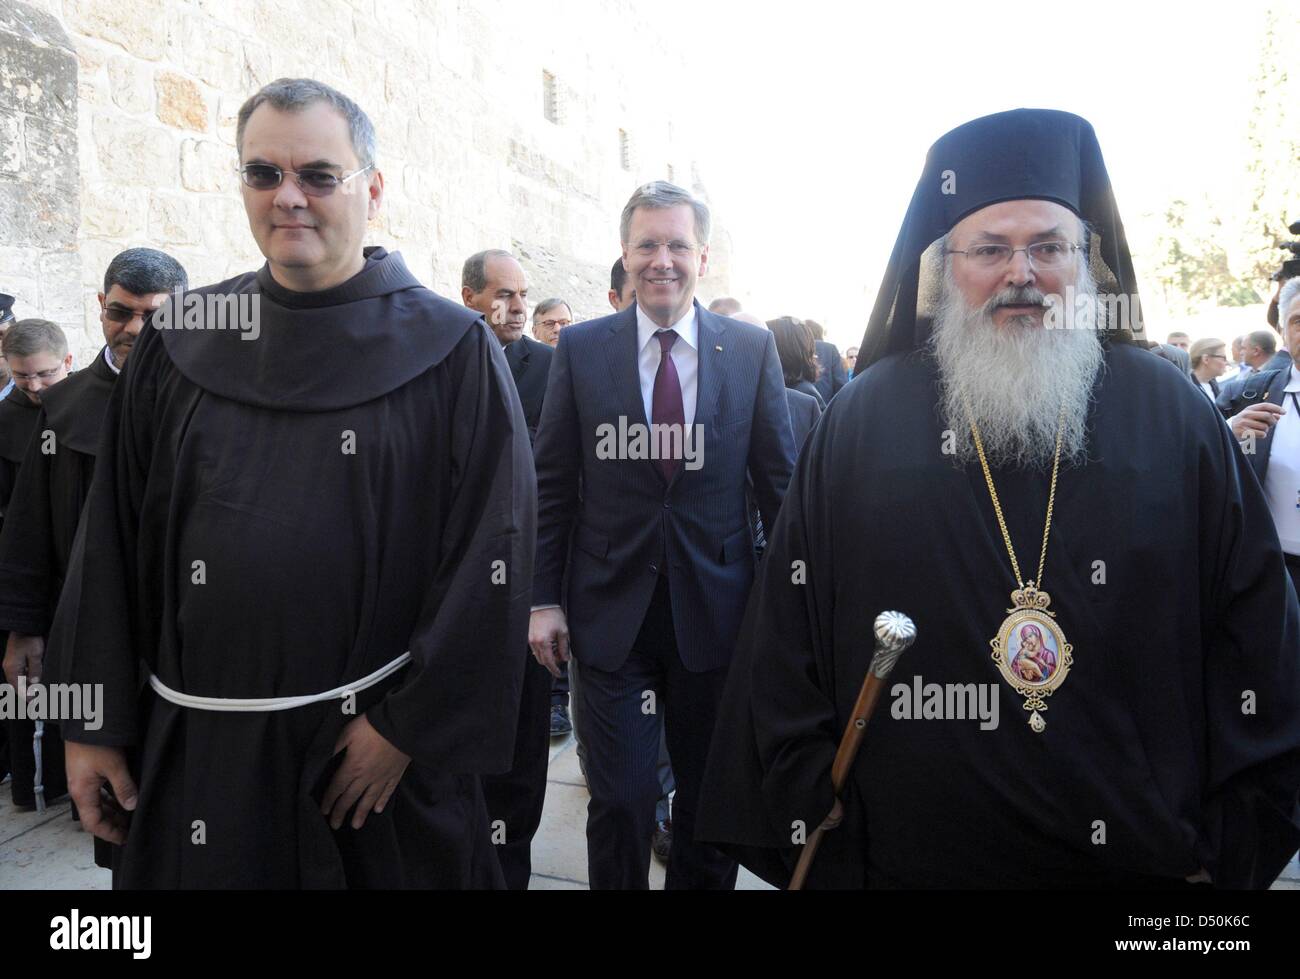 German President Christian Wulff (M), his daughter Annalena (not pictured), Greek-Orthodox Bishop Theoflakes (R) and the head of the Franciscan parish Father Marwan Daadas (L) walk to the Church of the Nativity in Bethlehem, Palestinian Territories, 30 November 2010. The four-day state visit of German President Wulff will end today with his visit to the Palestinian Territories. Pho Stock Photo